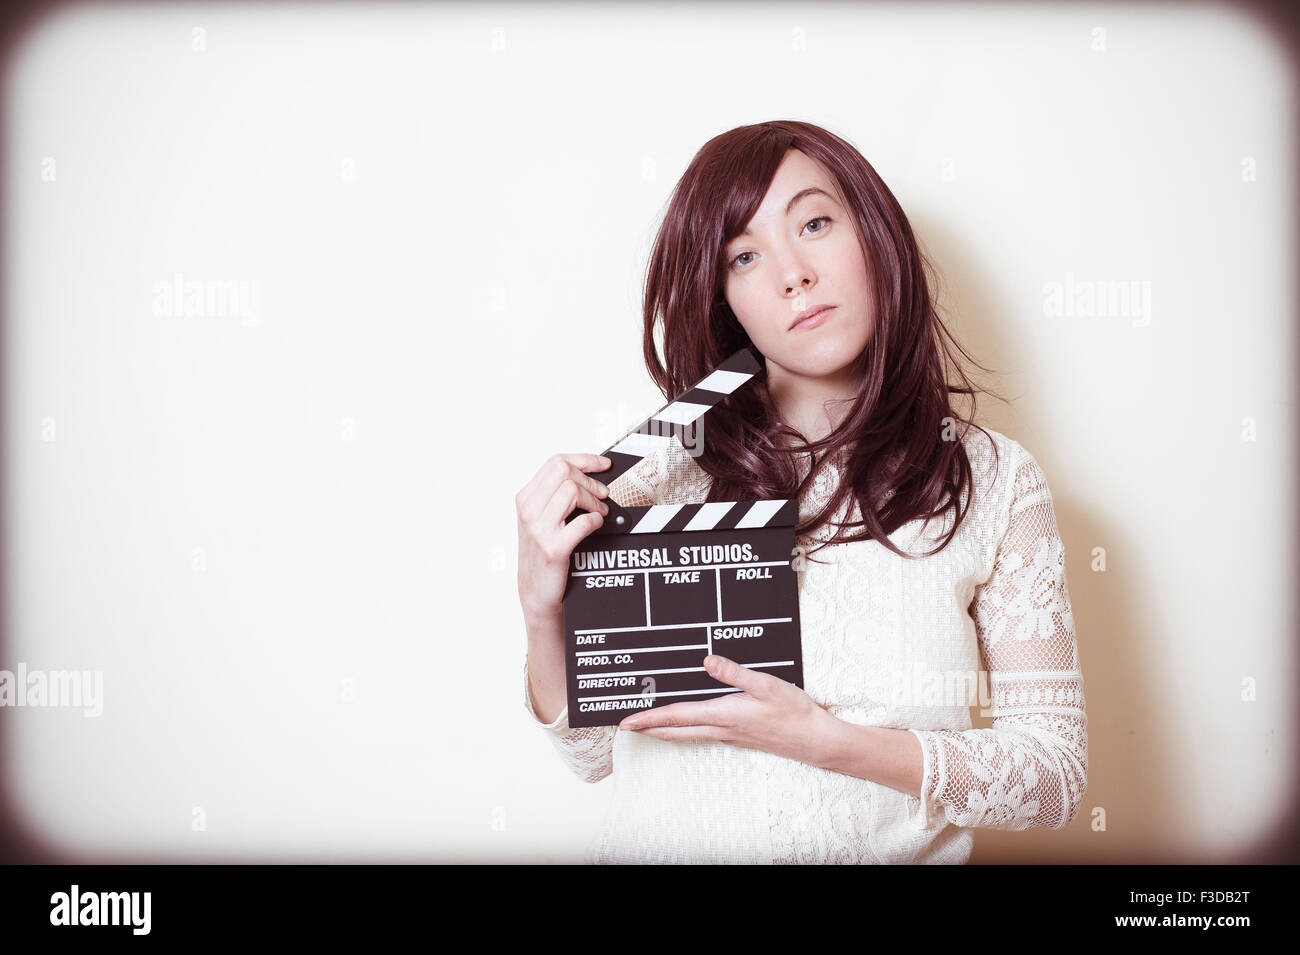 Young beautiful cinema actress with movie clapper board portrait Stock Photo